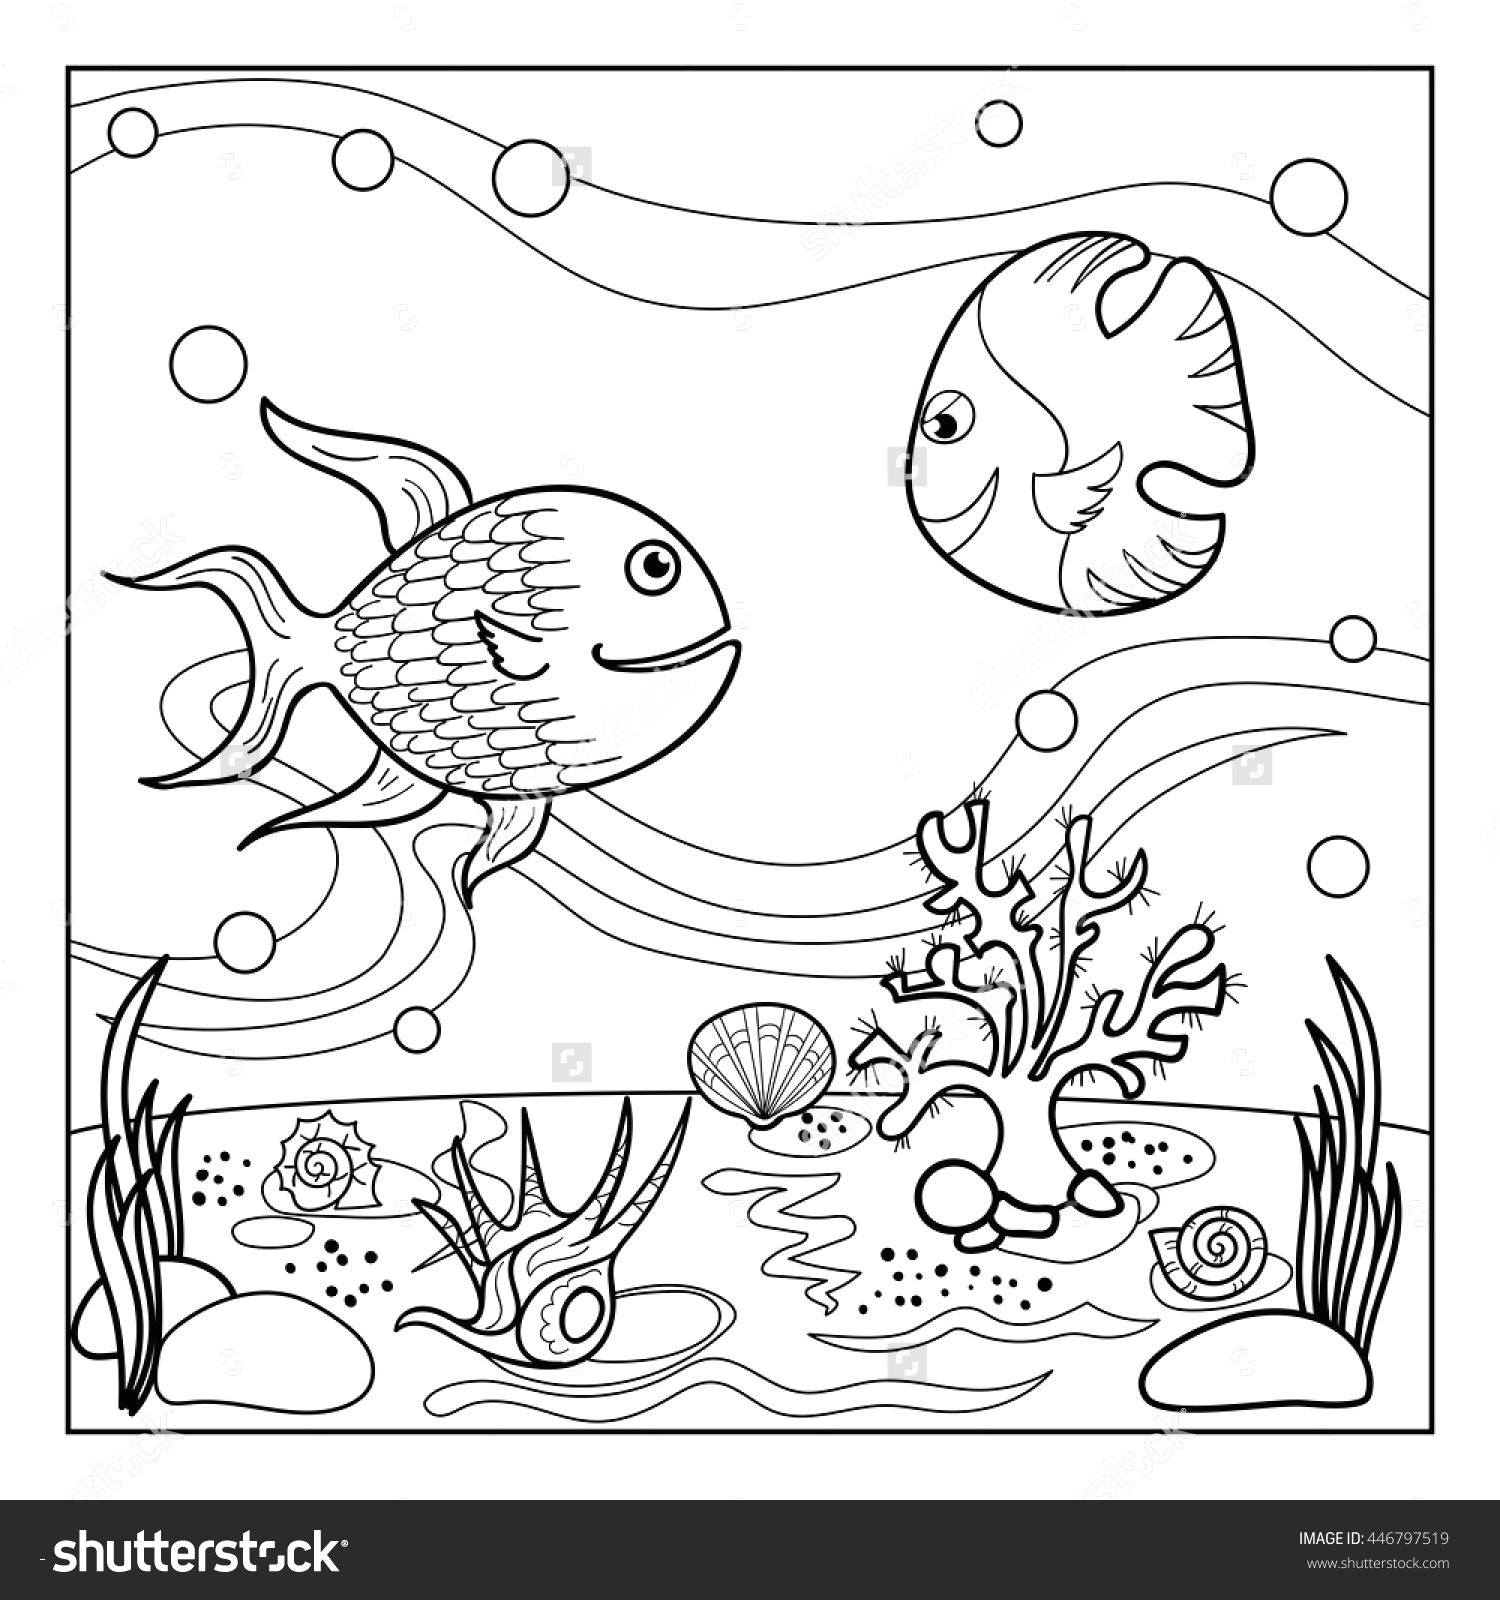 Easy Drawings Human Easy to Draw Feather Feather Coloring Page Fresh Home Coloring Pages